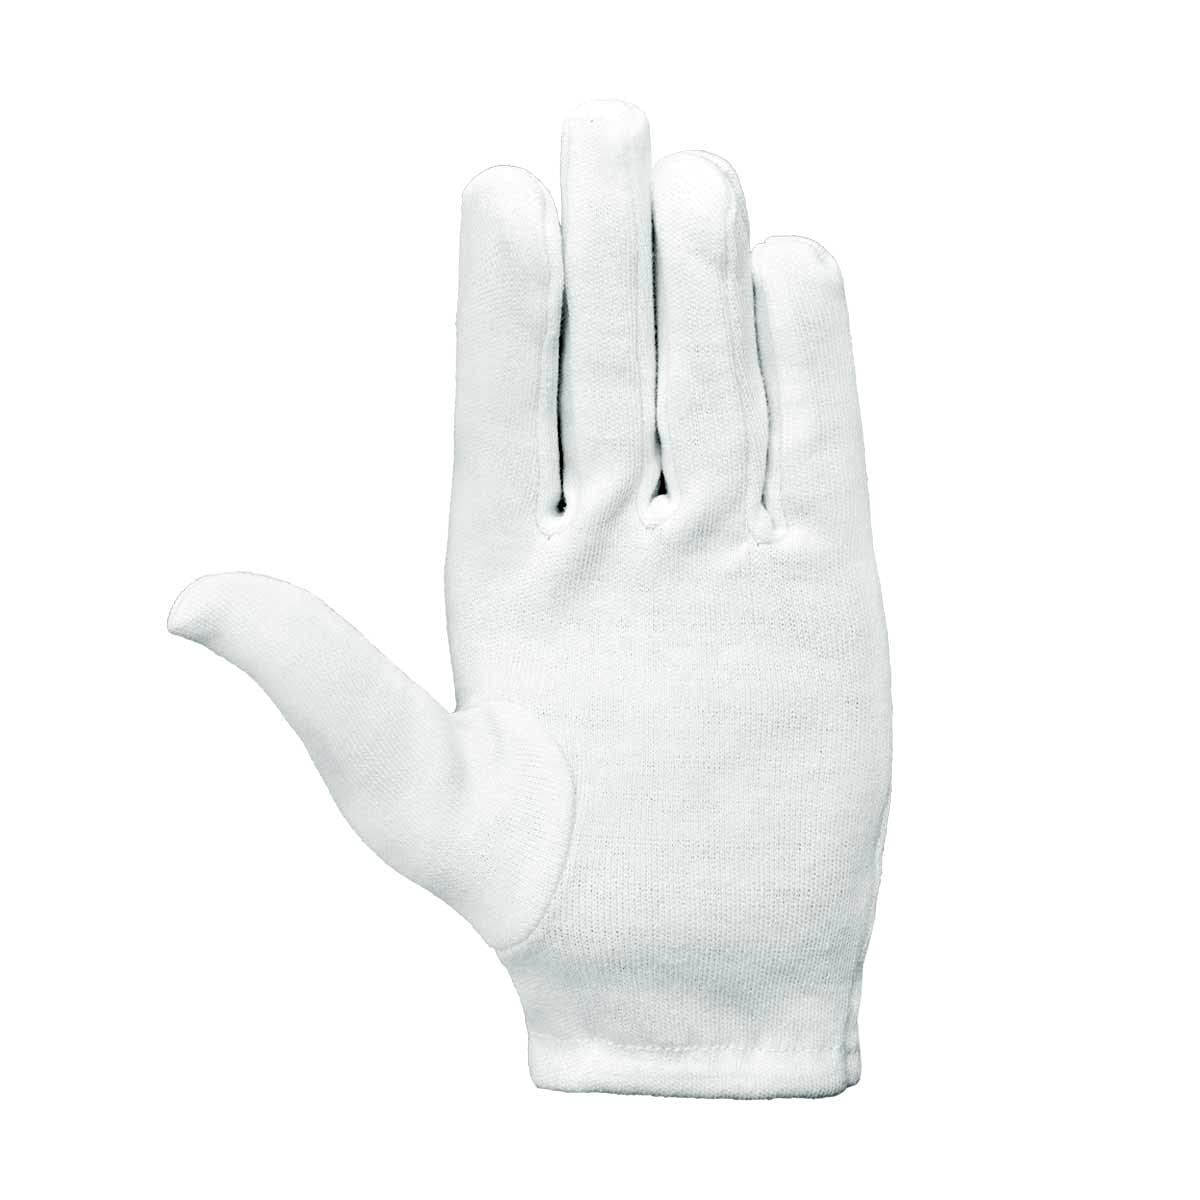 Mould King Cricket Gloves GM Inner Gloves - Padded Cotton Youth